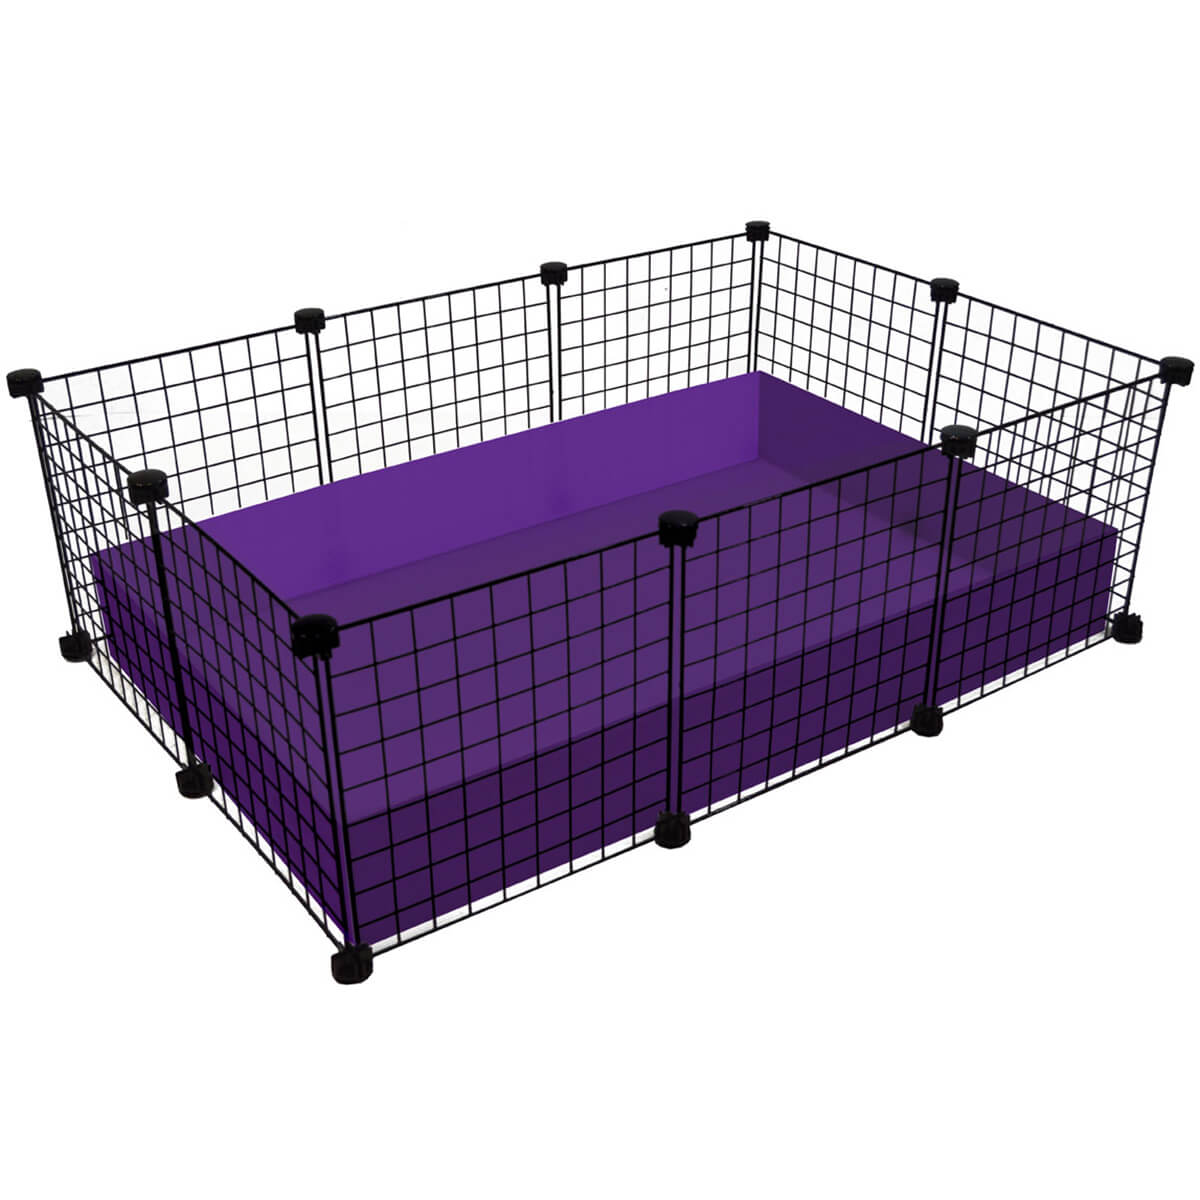 Small (2x3 Grid) C&C Cage for guinea pigs made by Cagetopia